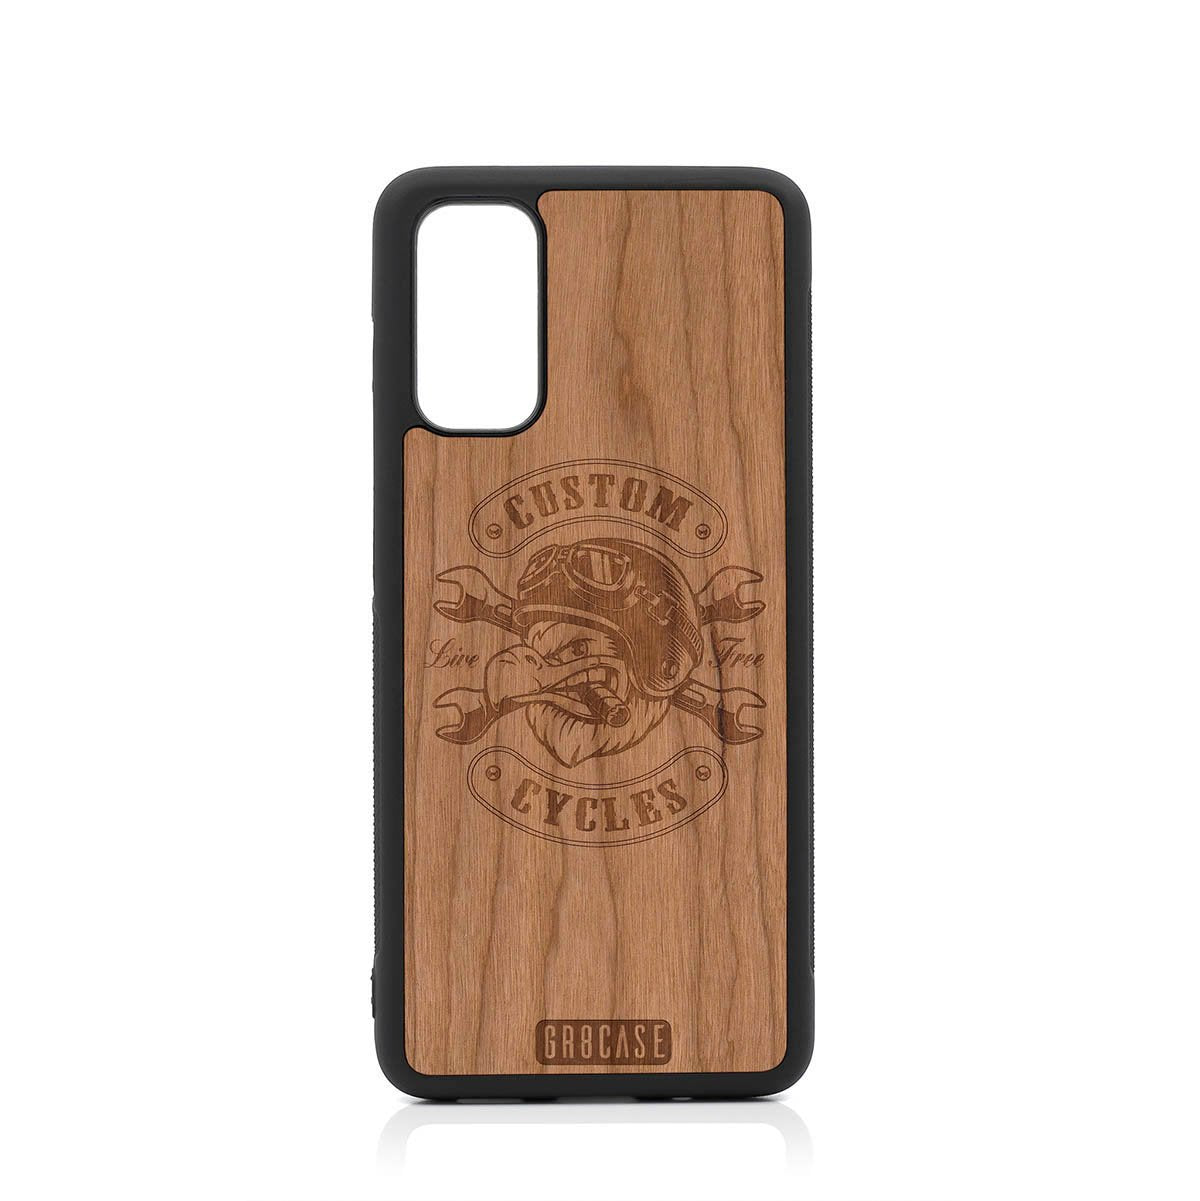 Custom Cycles Live Free (Biker Eagle) Design Wood Case For Samsung Galaxy S20 FE 5G by GR8CASE